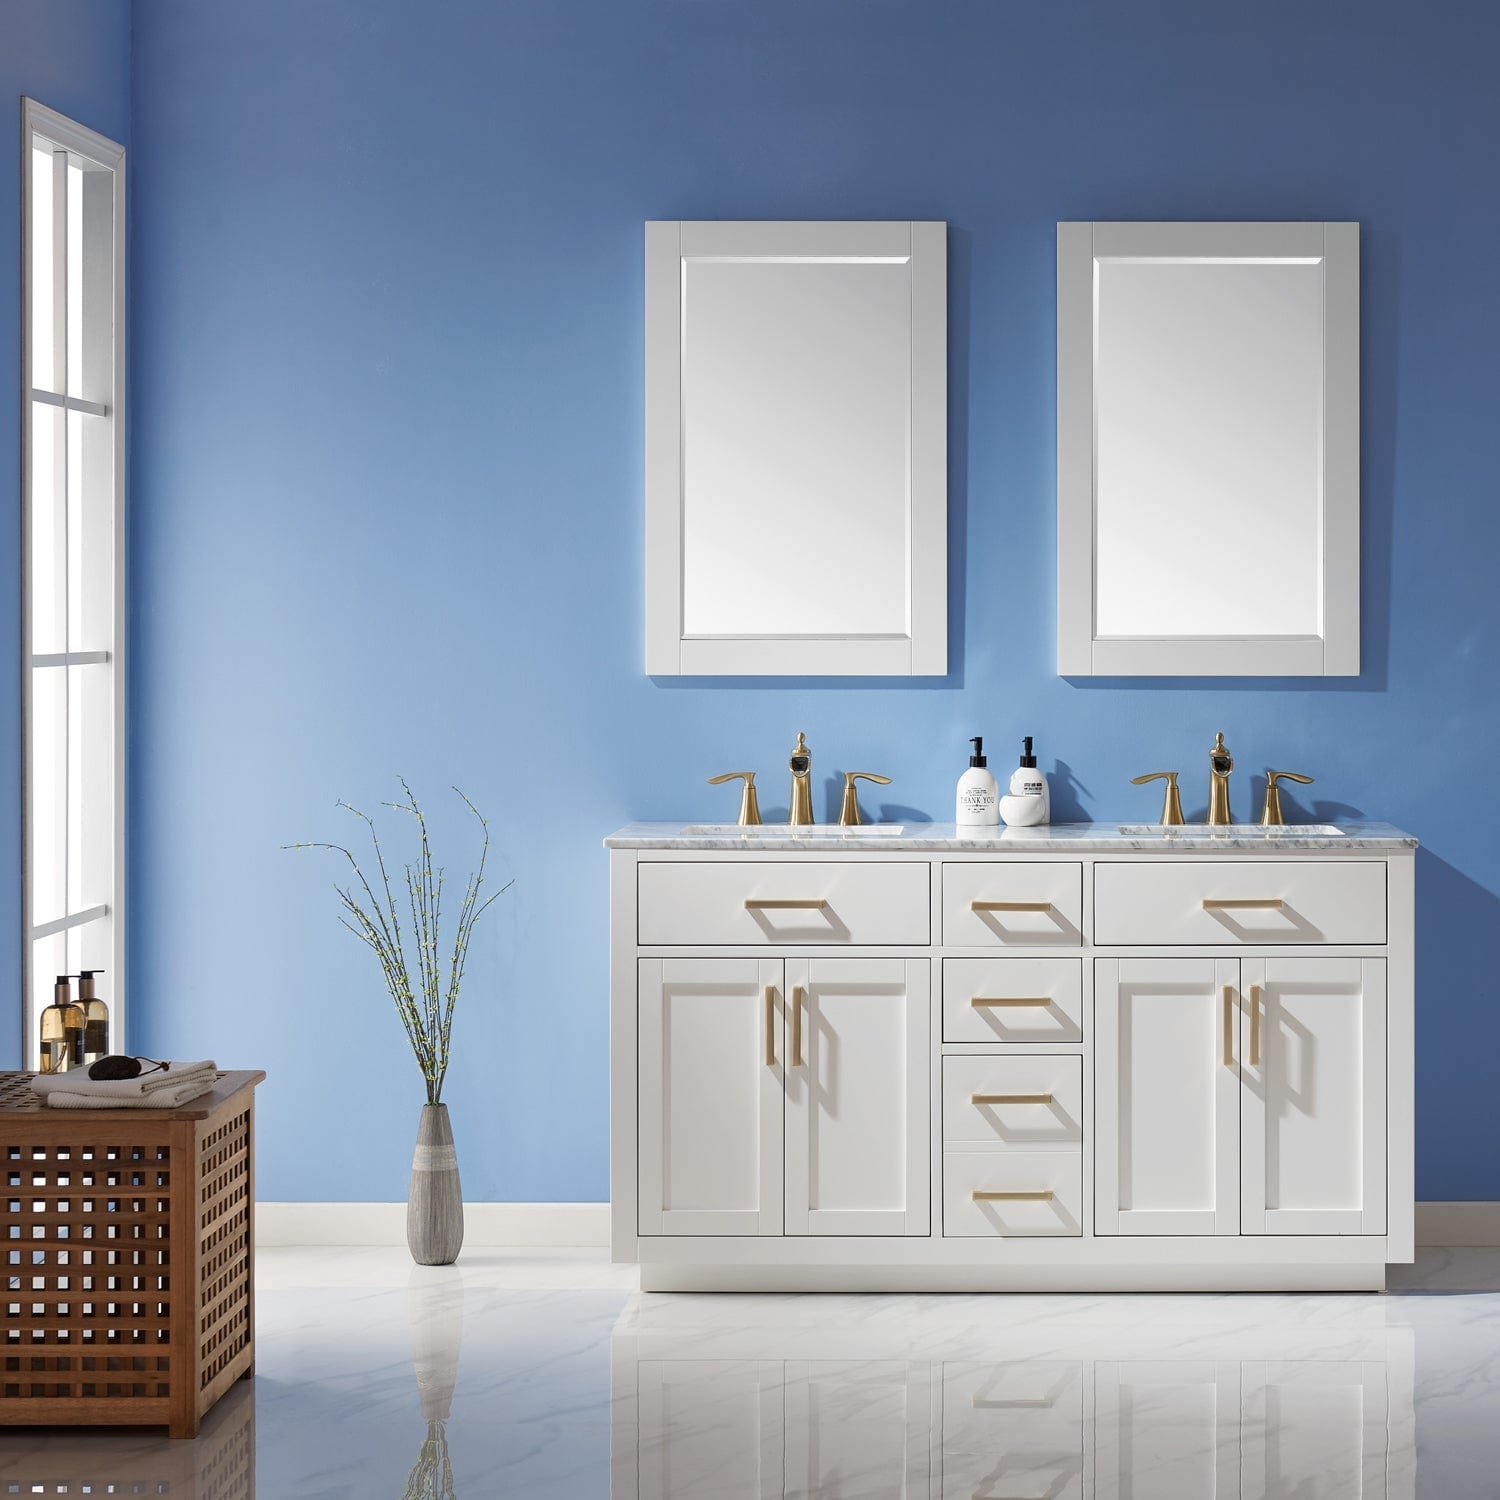 Altair Ivy 60" Double Bathroom Vanity Set in White and Carrara White Marble Countertop with Mirror 531060-WH-CA - Molaix631112971256Vanity531060-WH-CA